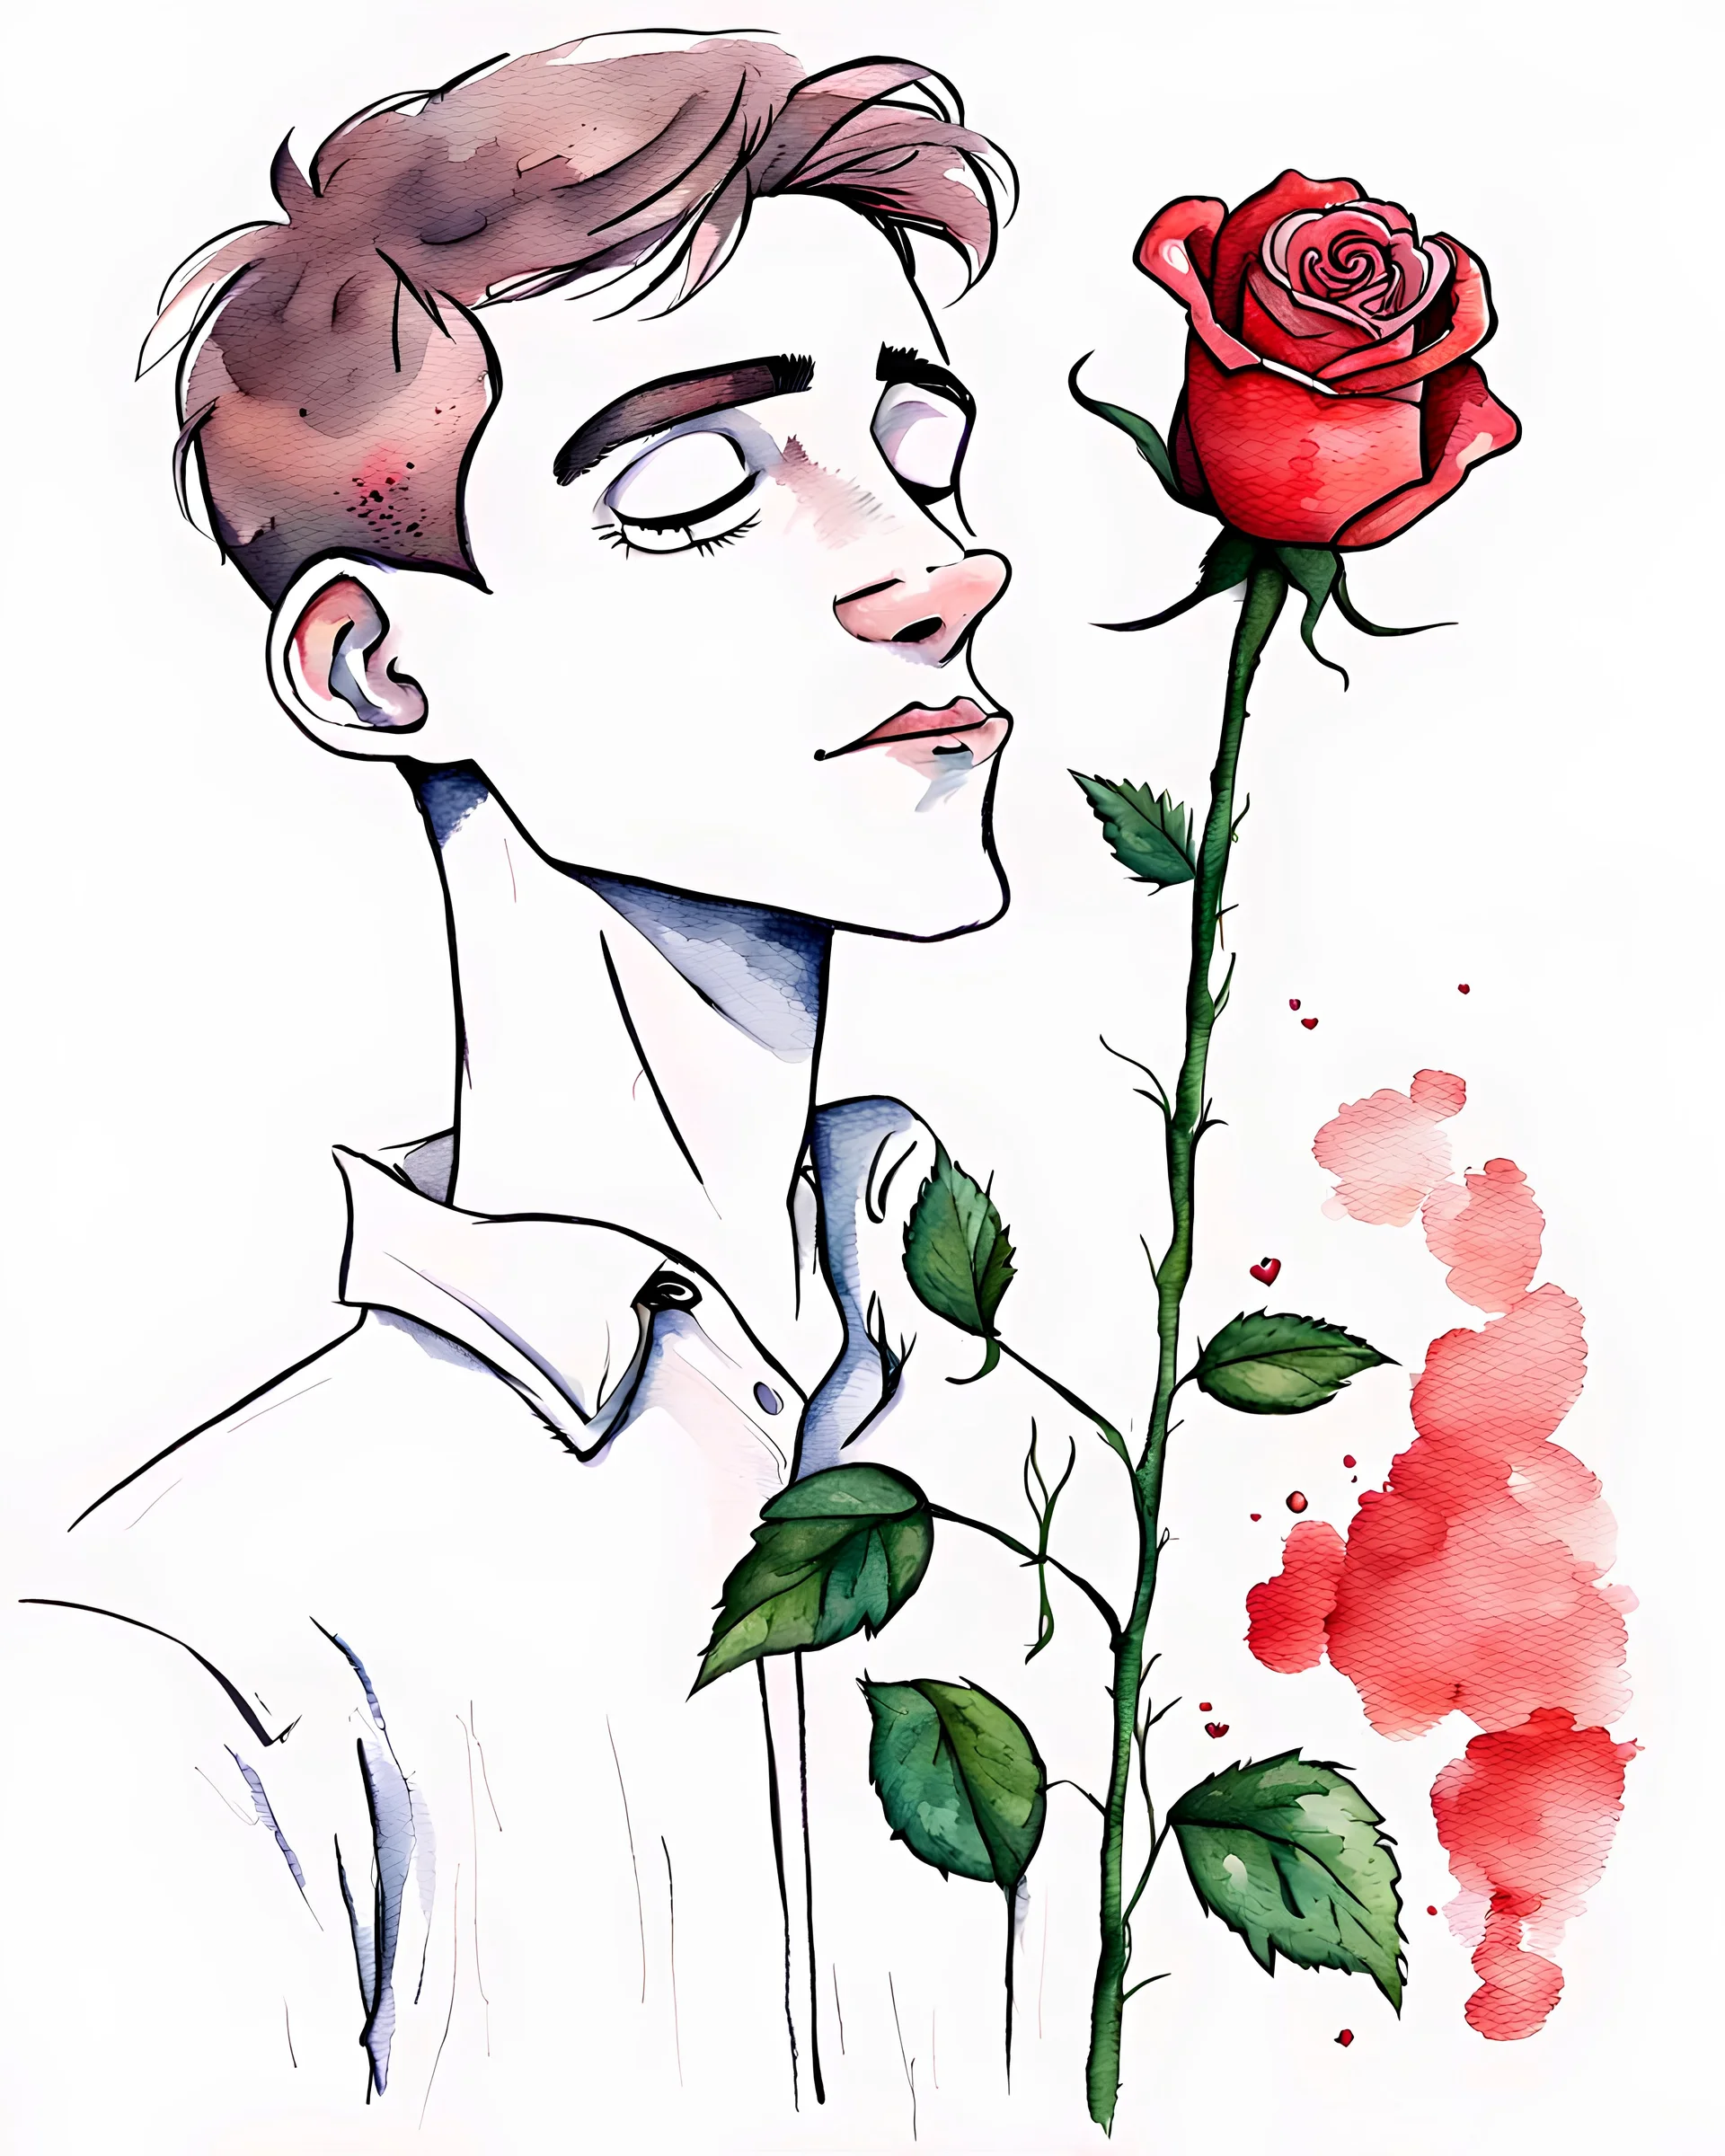 The young man dies and withers like a rose and does not repent of love, cartoon, cute drawing, watercolor.